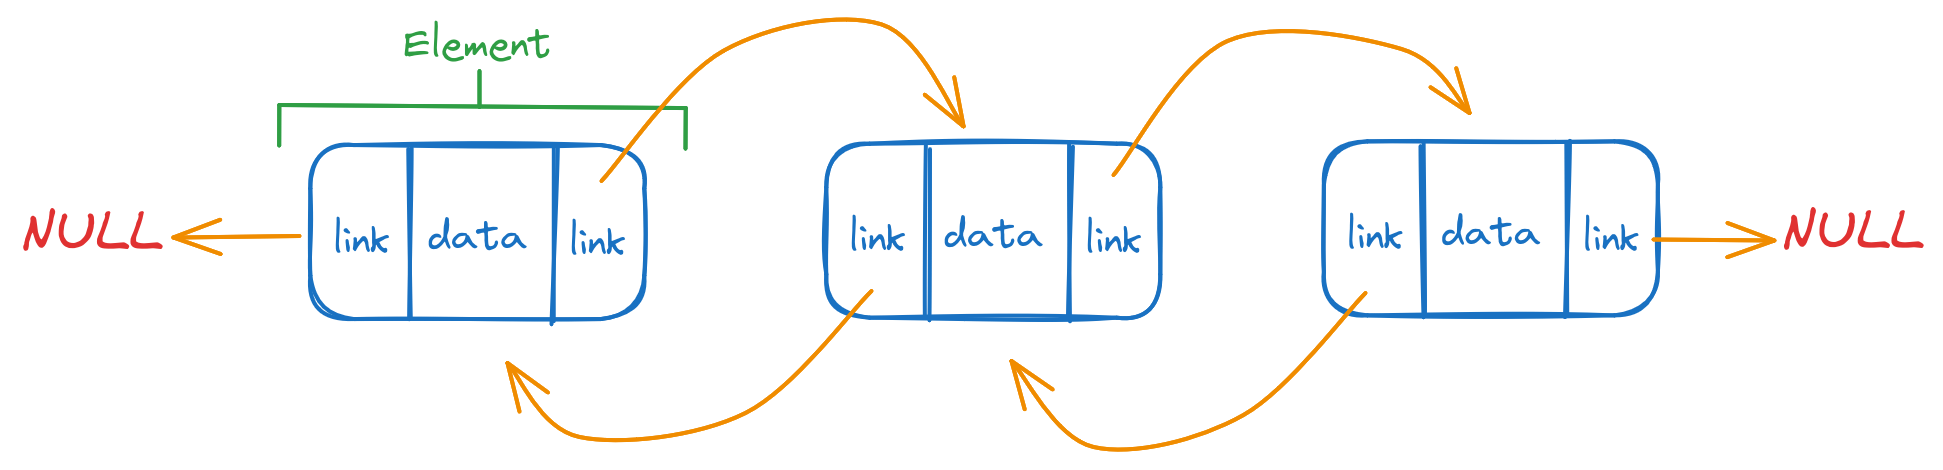 Diagram of a doubly linked list